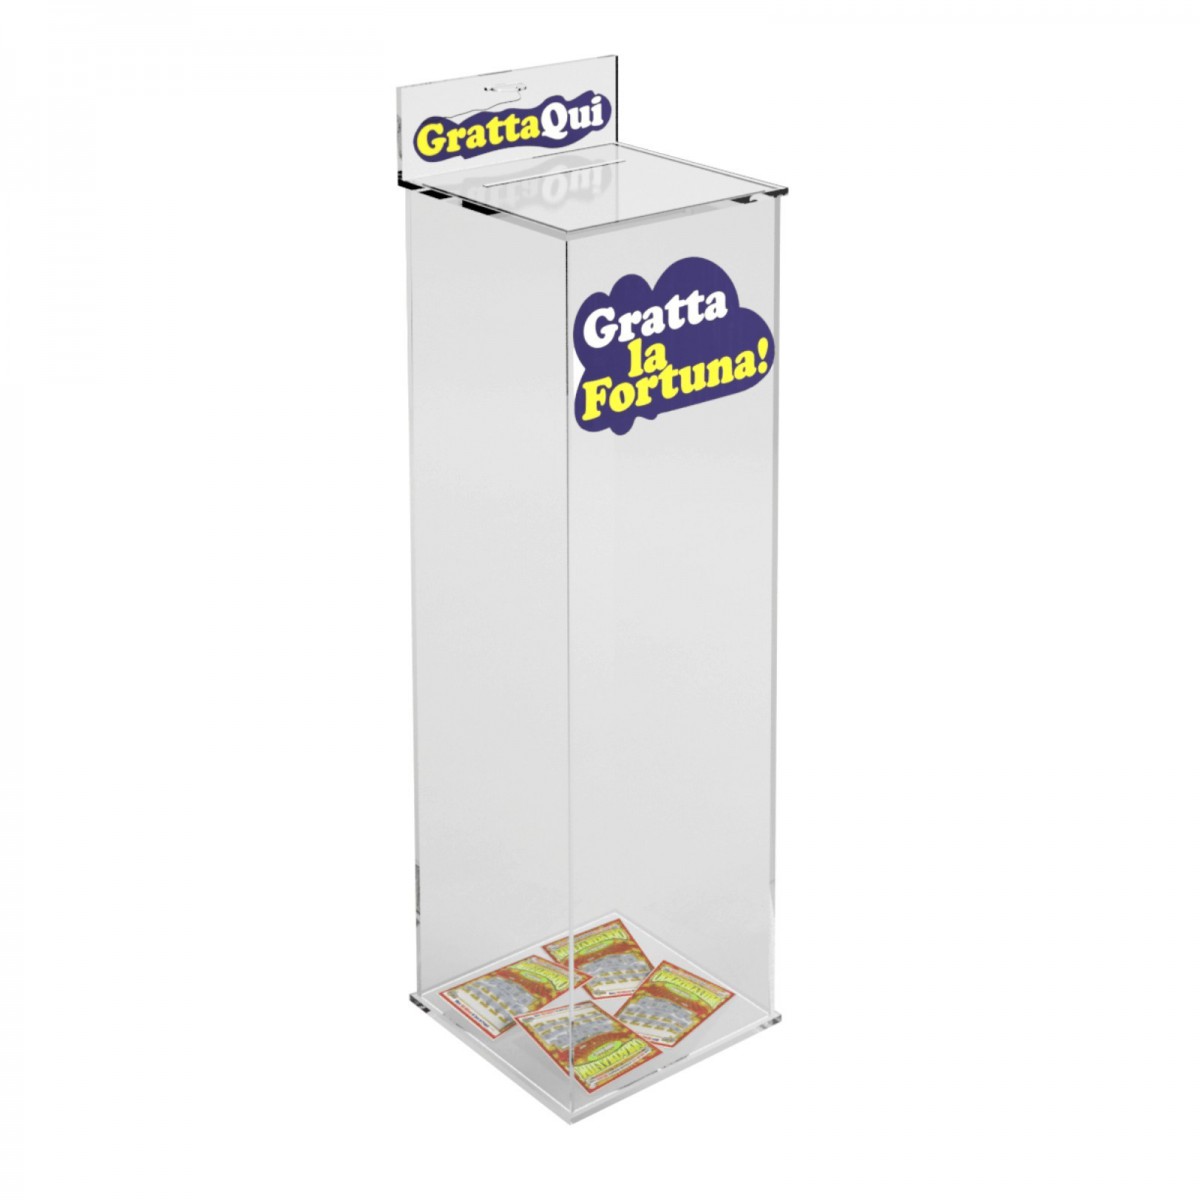 Acrylic wastebasket for scretch and win cards - Tubular Dimensions: 9.45’’W x 9.45’’ D x 37.4’’